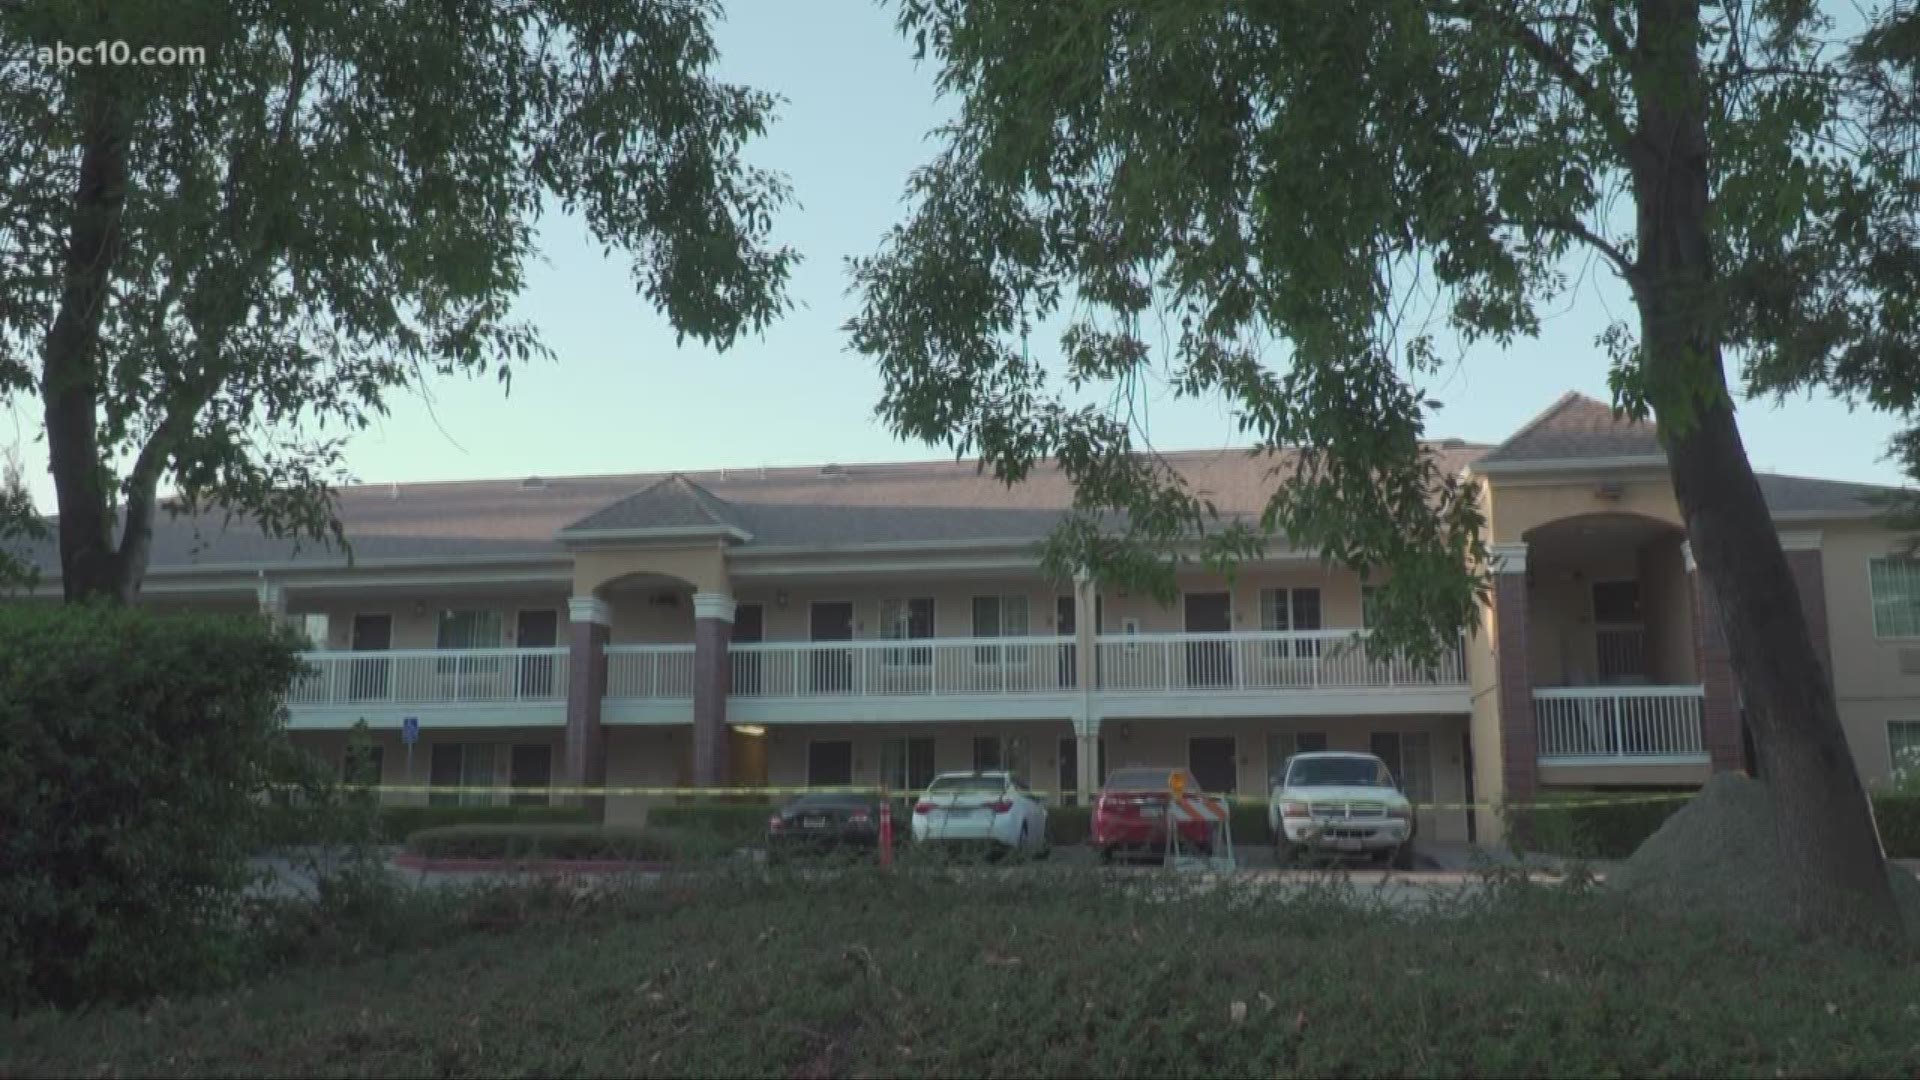 Police are investigating a double shooting near a hotel in the South Natomas area on Sunday.